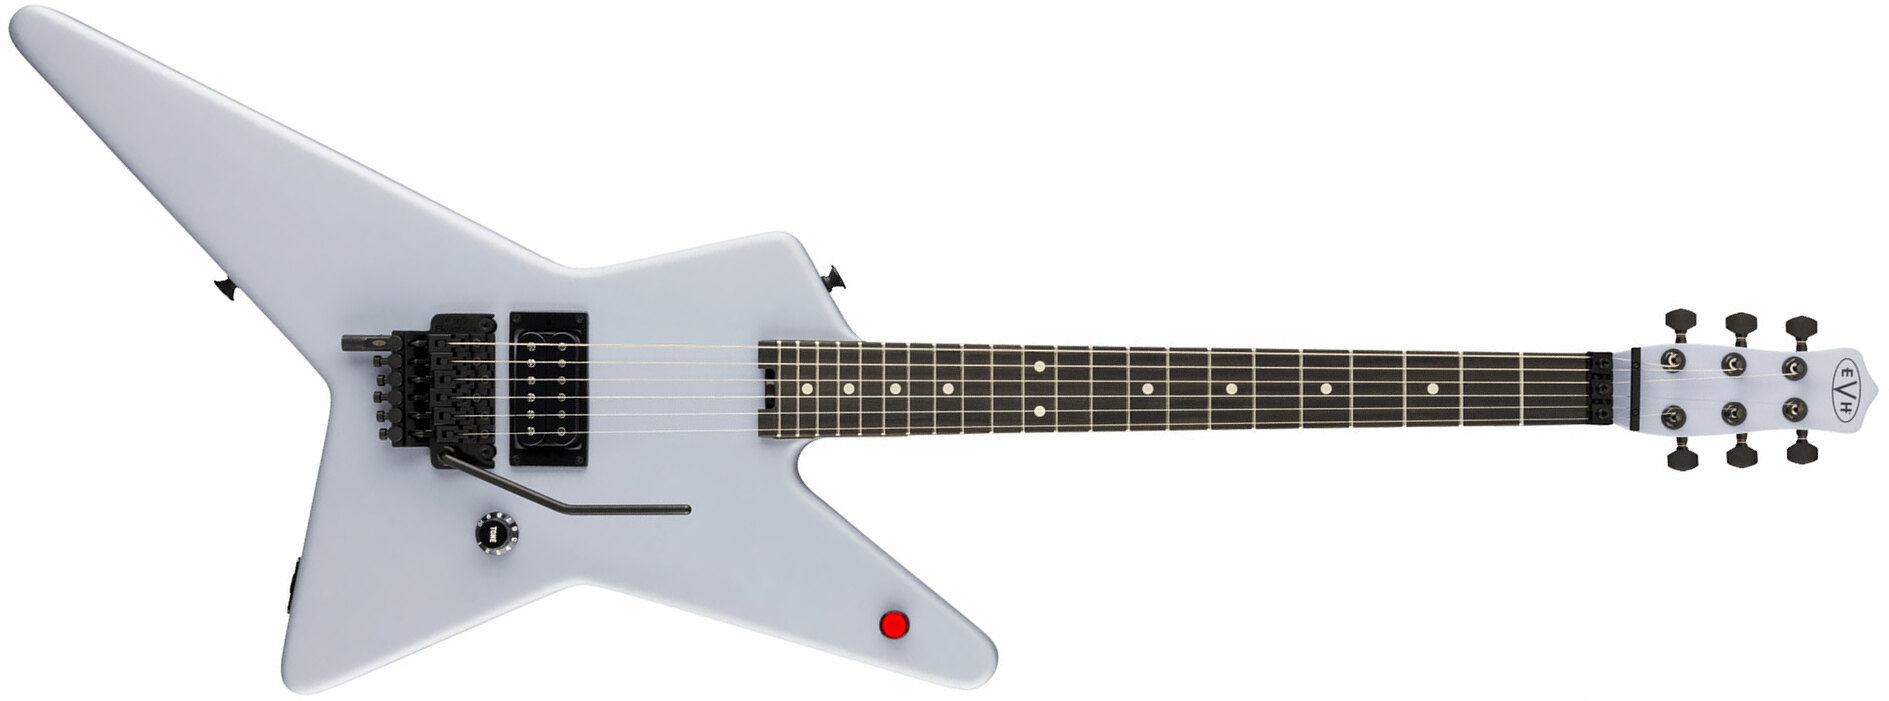 Evh Star Limited Edition 1h Fr Eb - Primer Gray - Guitarra electrica metalica - Main picture